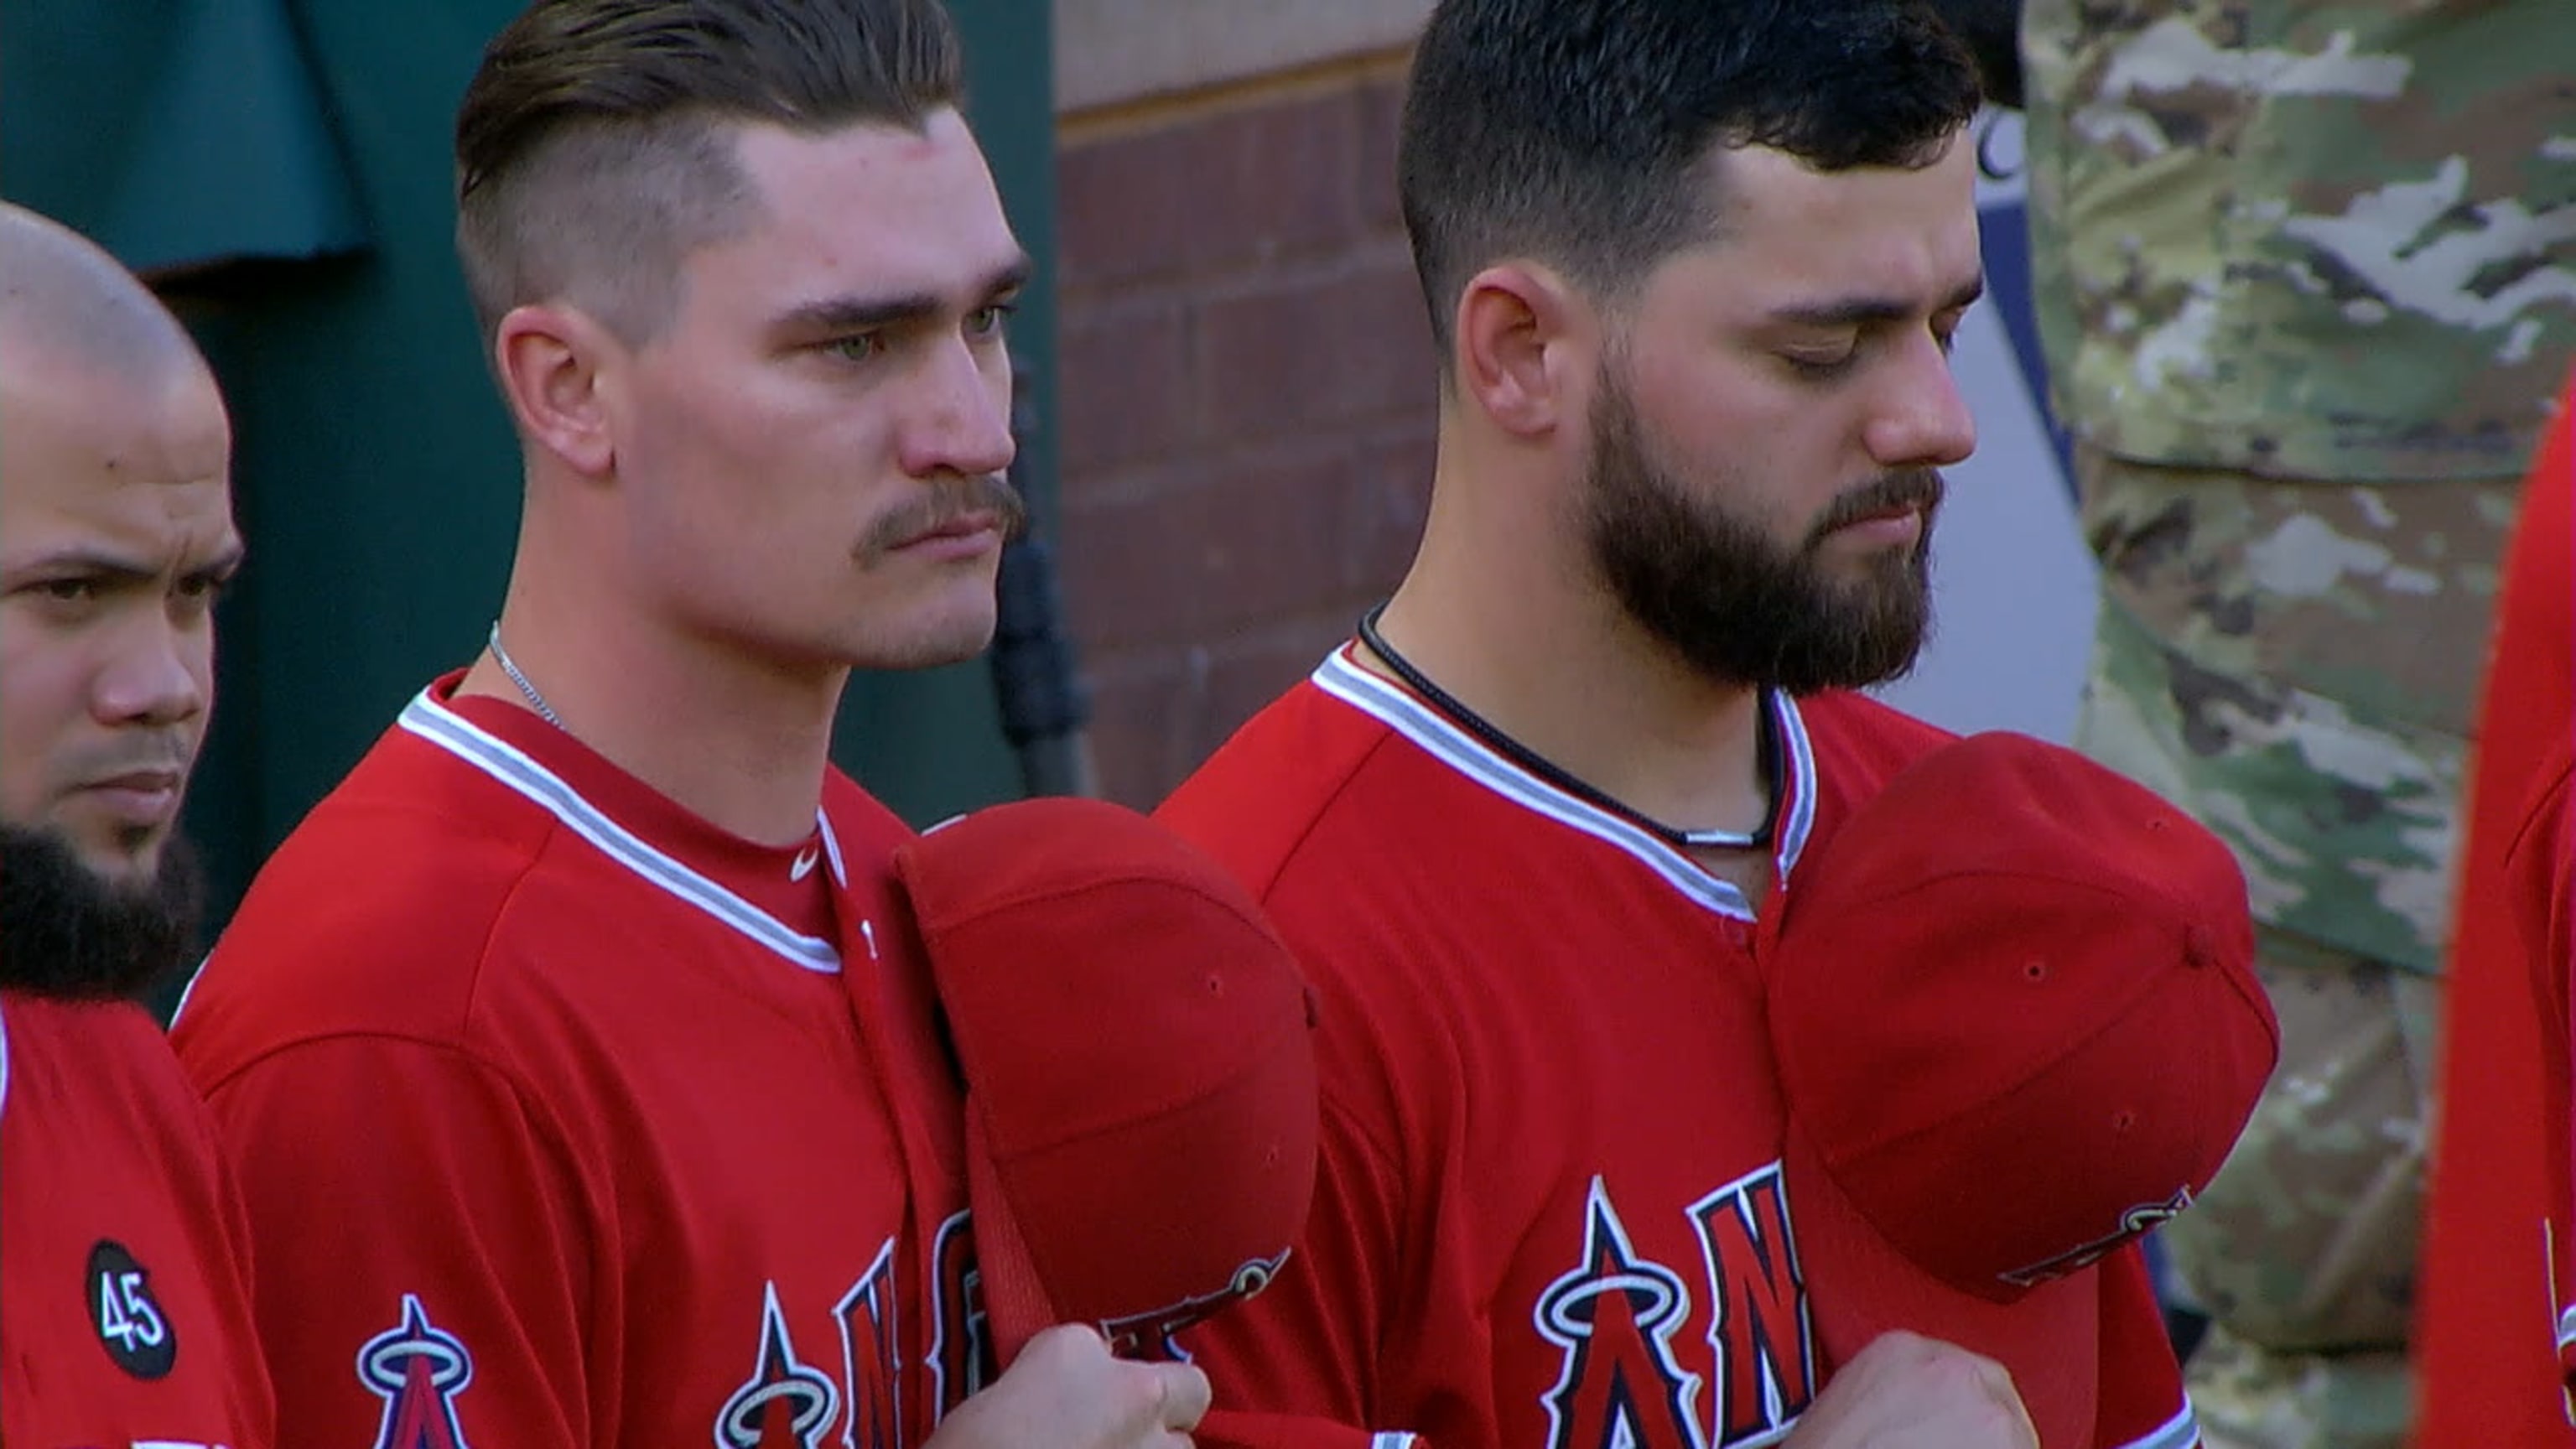 Four years later, Andrew Heaney remembers Tyler Skaggs the person, not the  tragedy